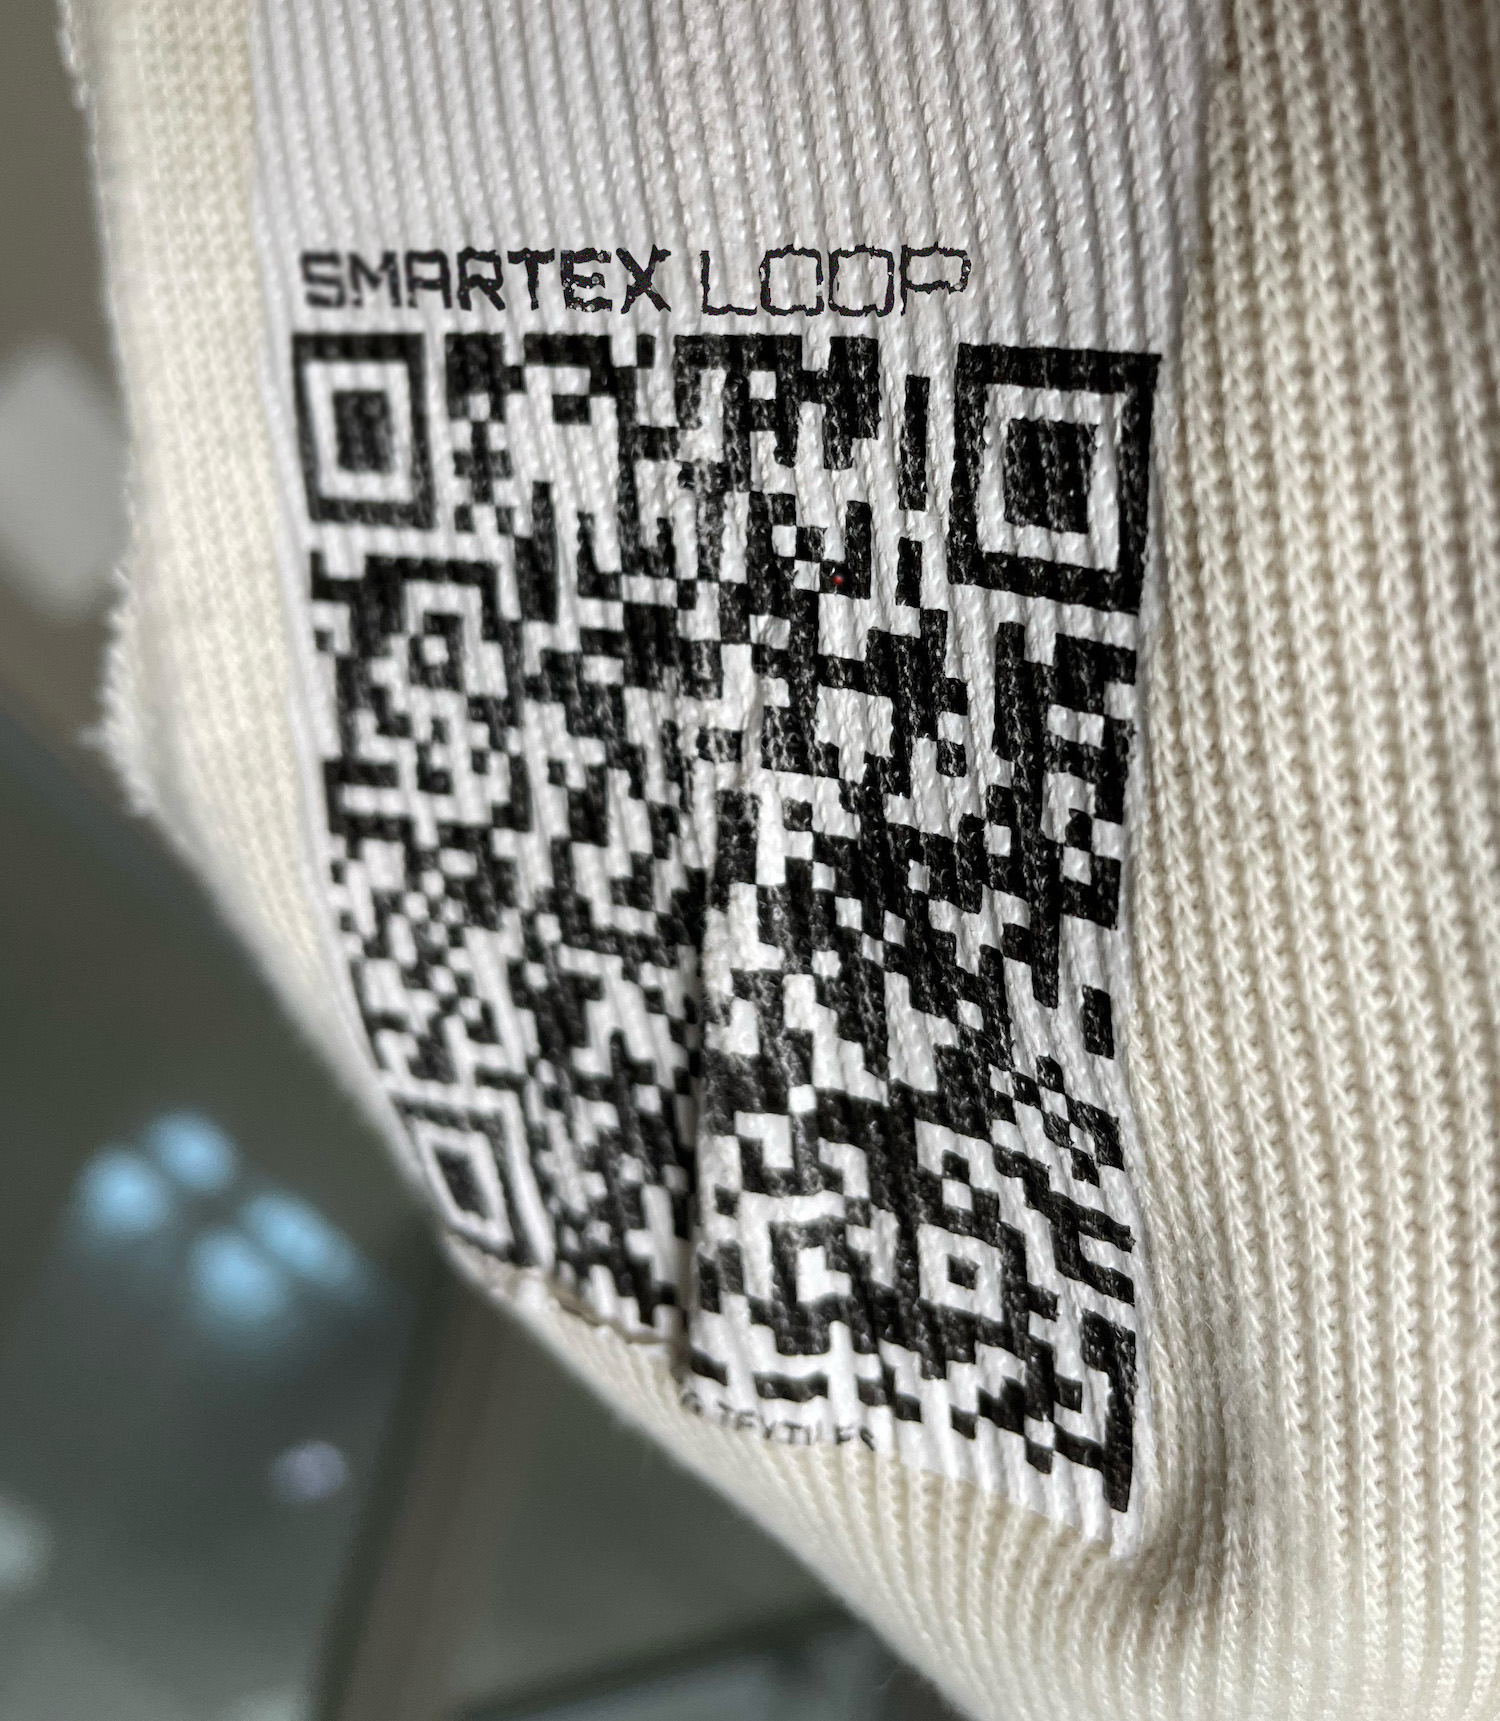 Smartex Loop passport attached to a fabric roll. © Smartex